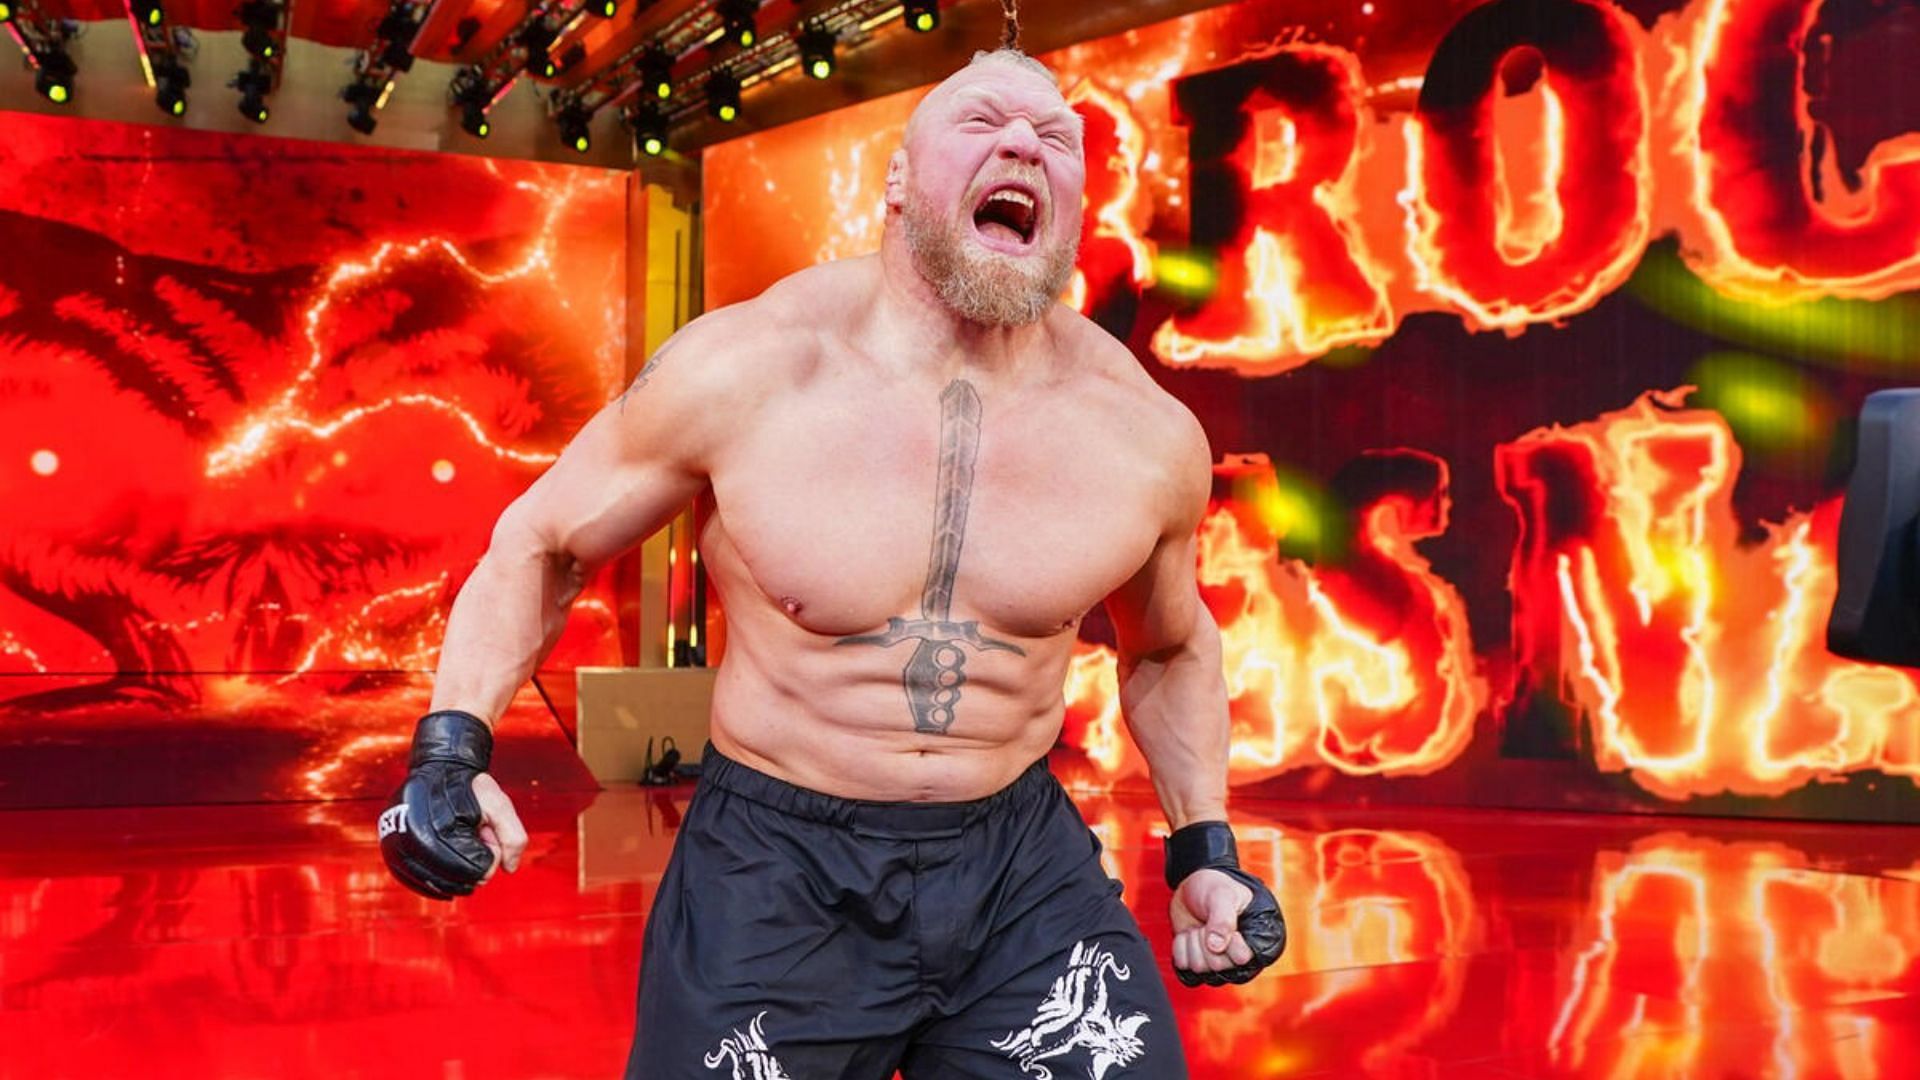 Brock Lesnar was one of the most dominant superstars in WWE